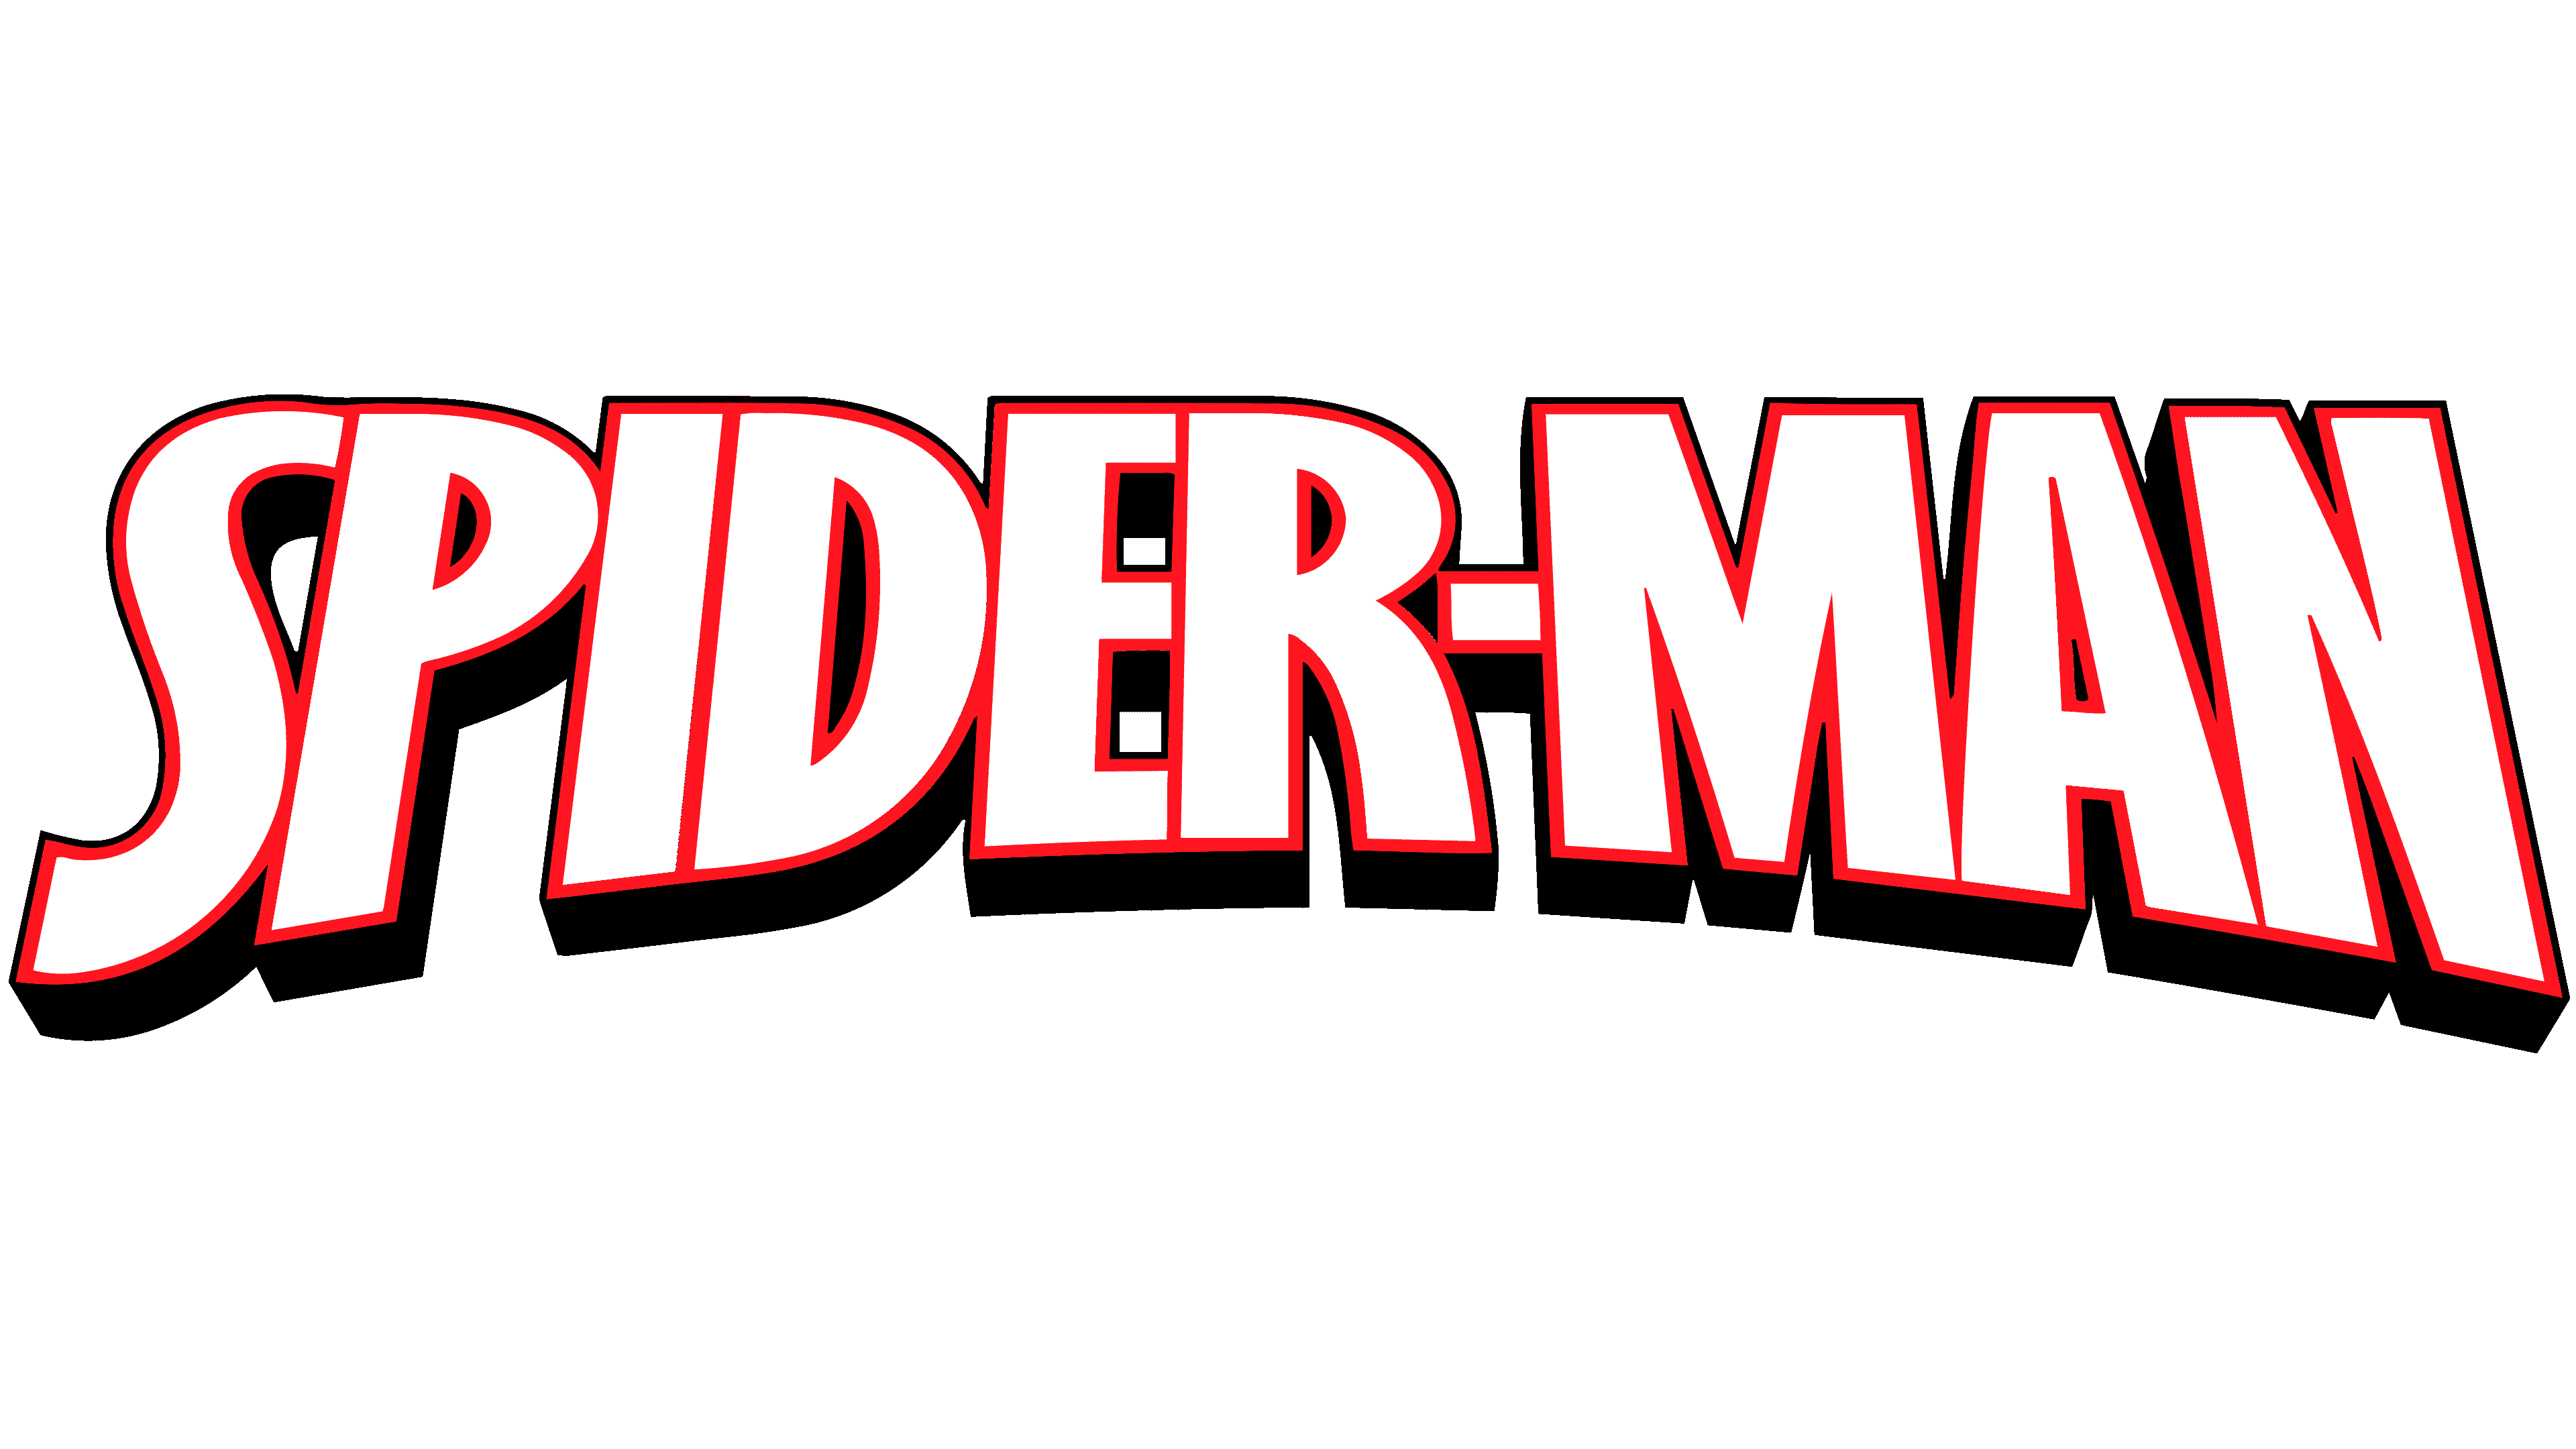 Spiderman Logo and symbol, meaning, history, PNG, brand